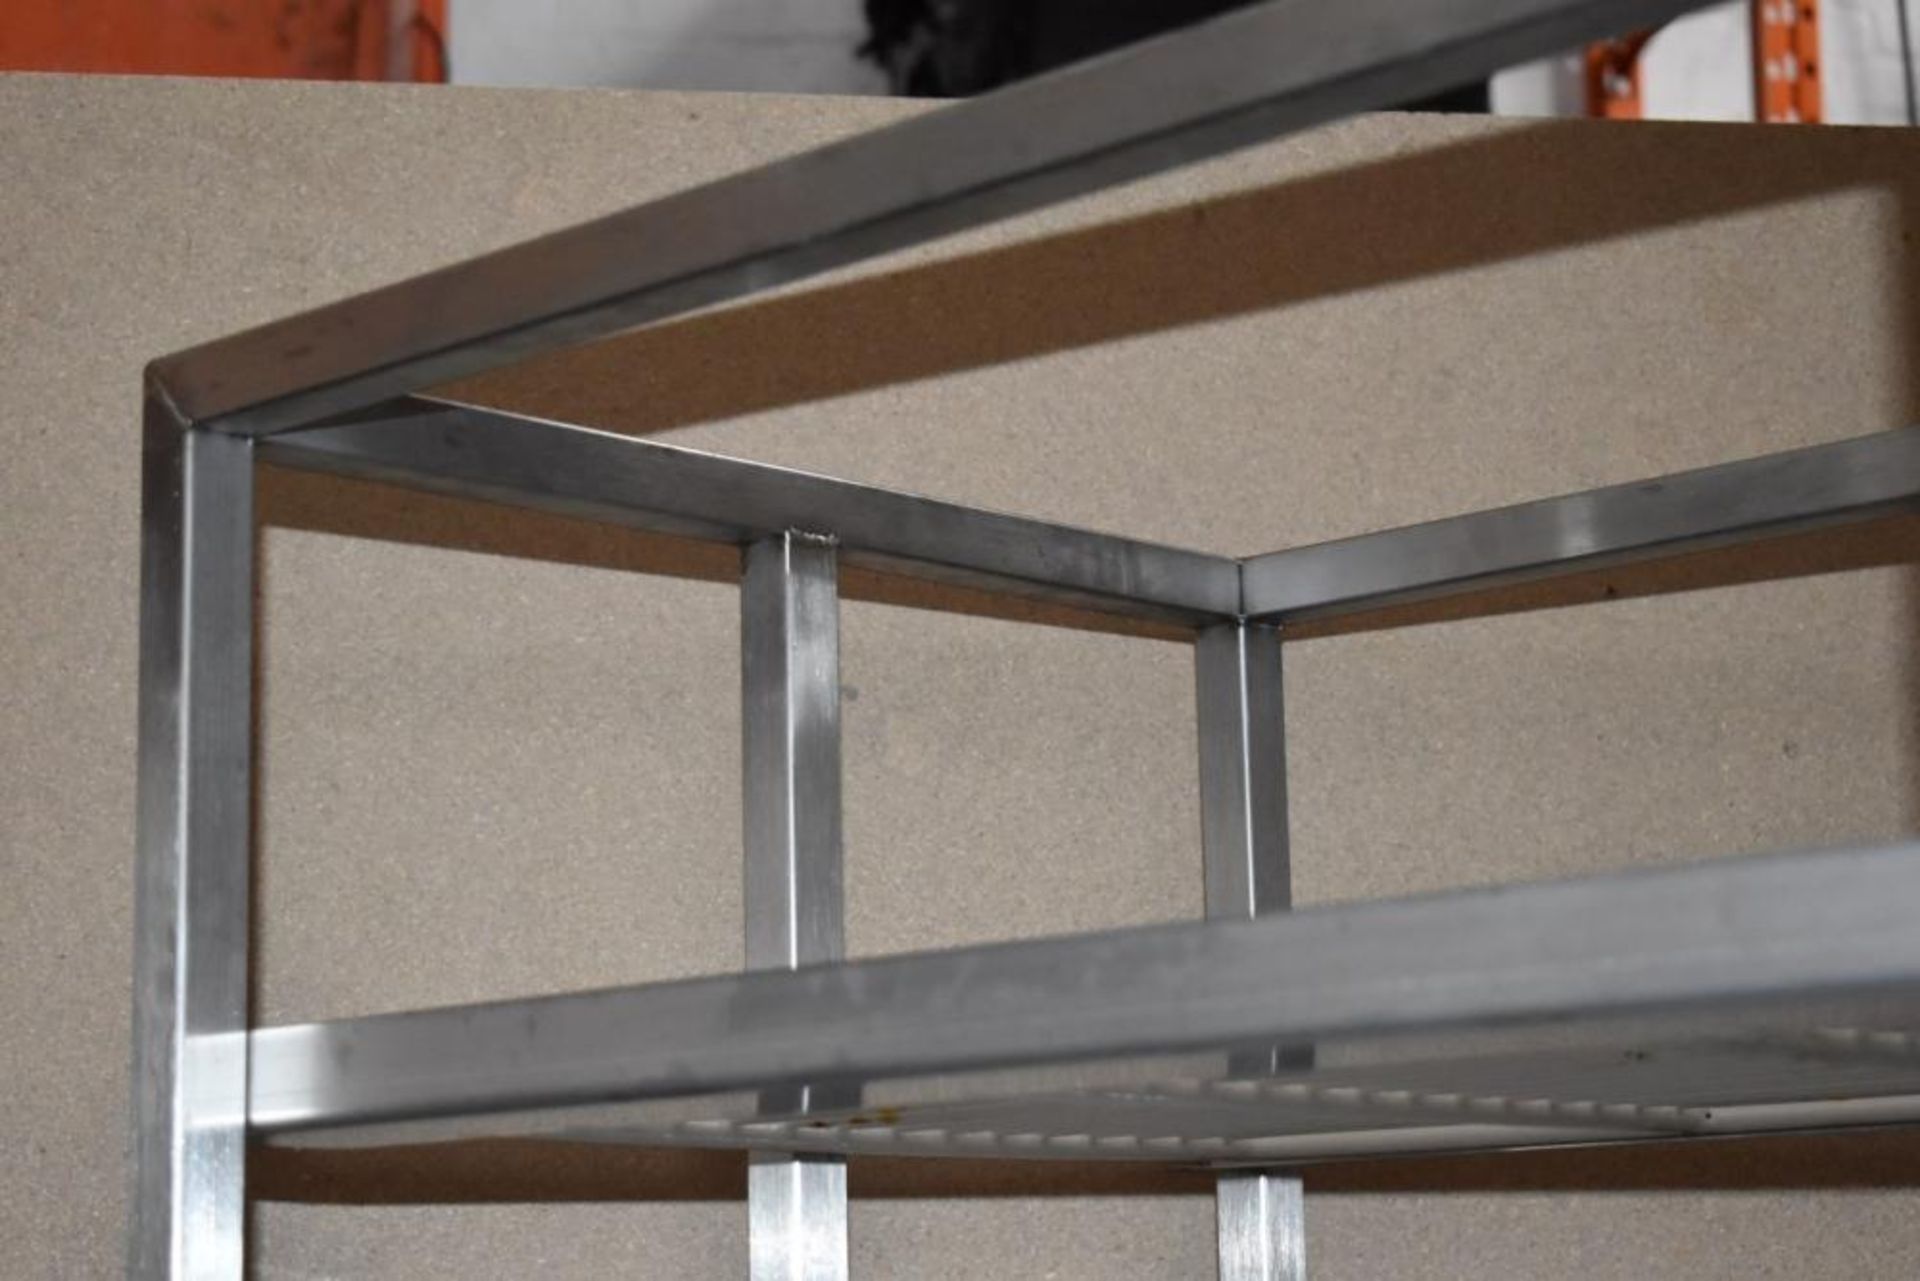 1 x Stainless Steel 8 Tier Mobile Shelf Unit For Commercial Kitchens With White Coated Wire Shelves - Image 3 of 11